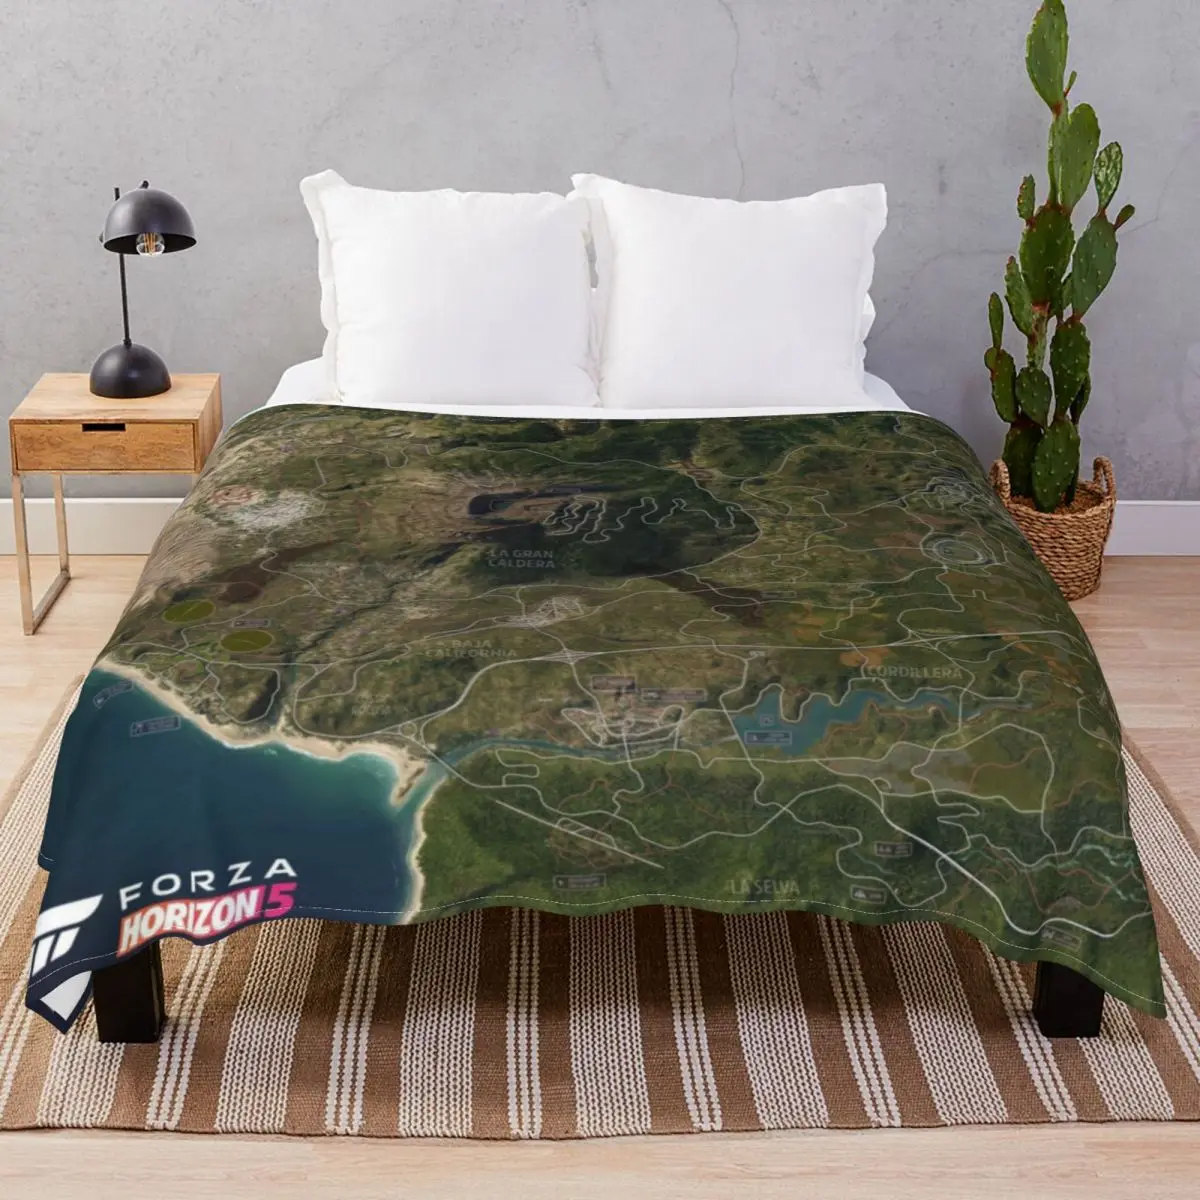 Forza Horizon 5 Map Blankets Coral Fleece Printed Comfortable Throw Blanket for Bedding Home Couch Camp Office